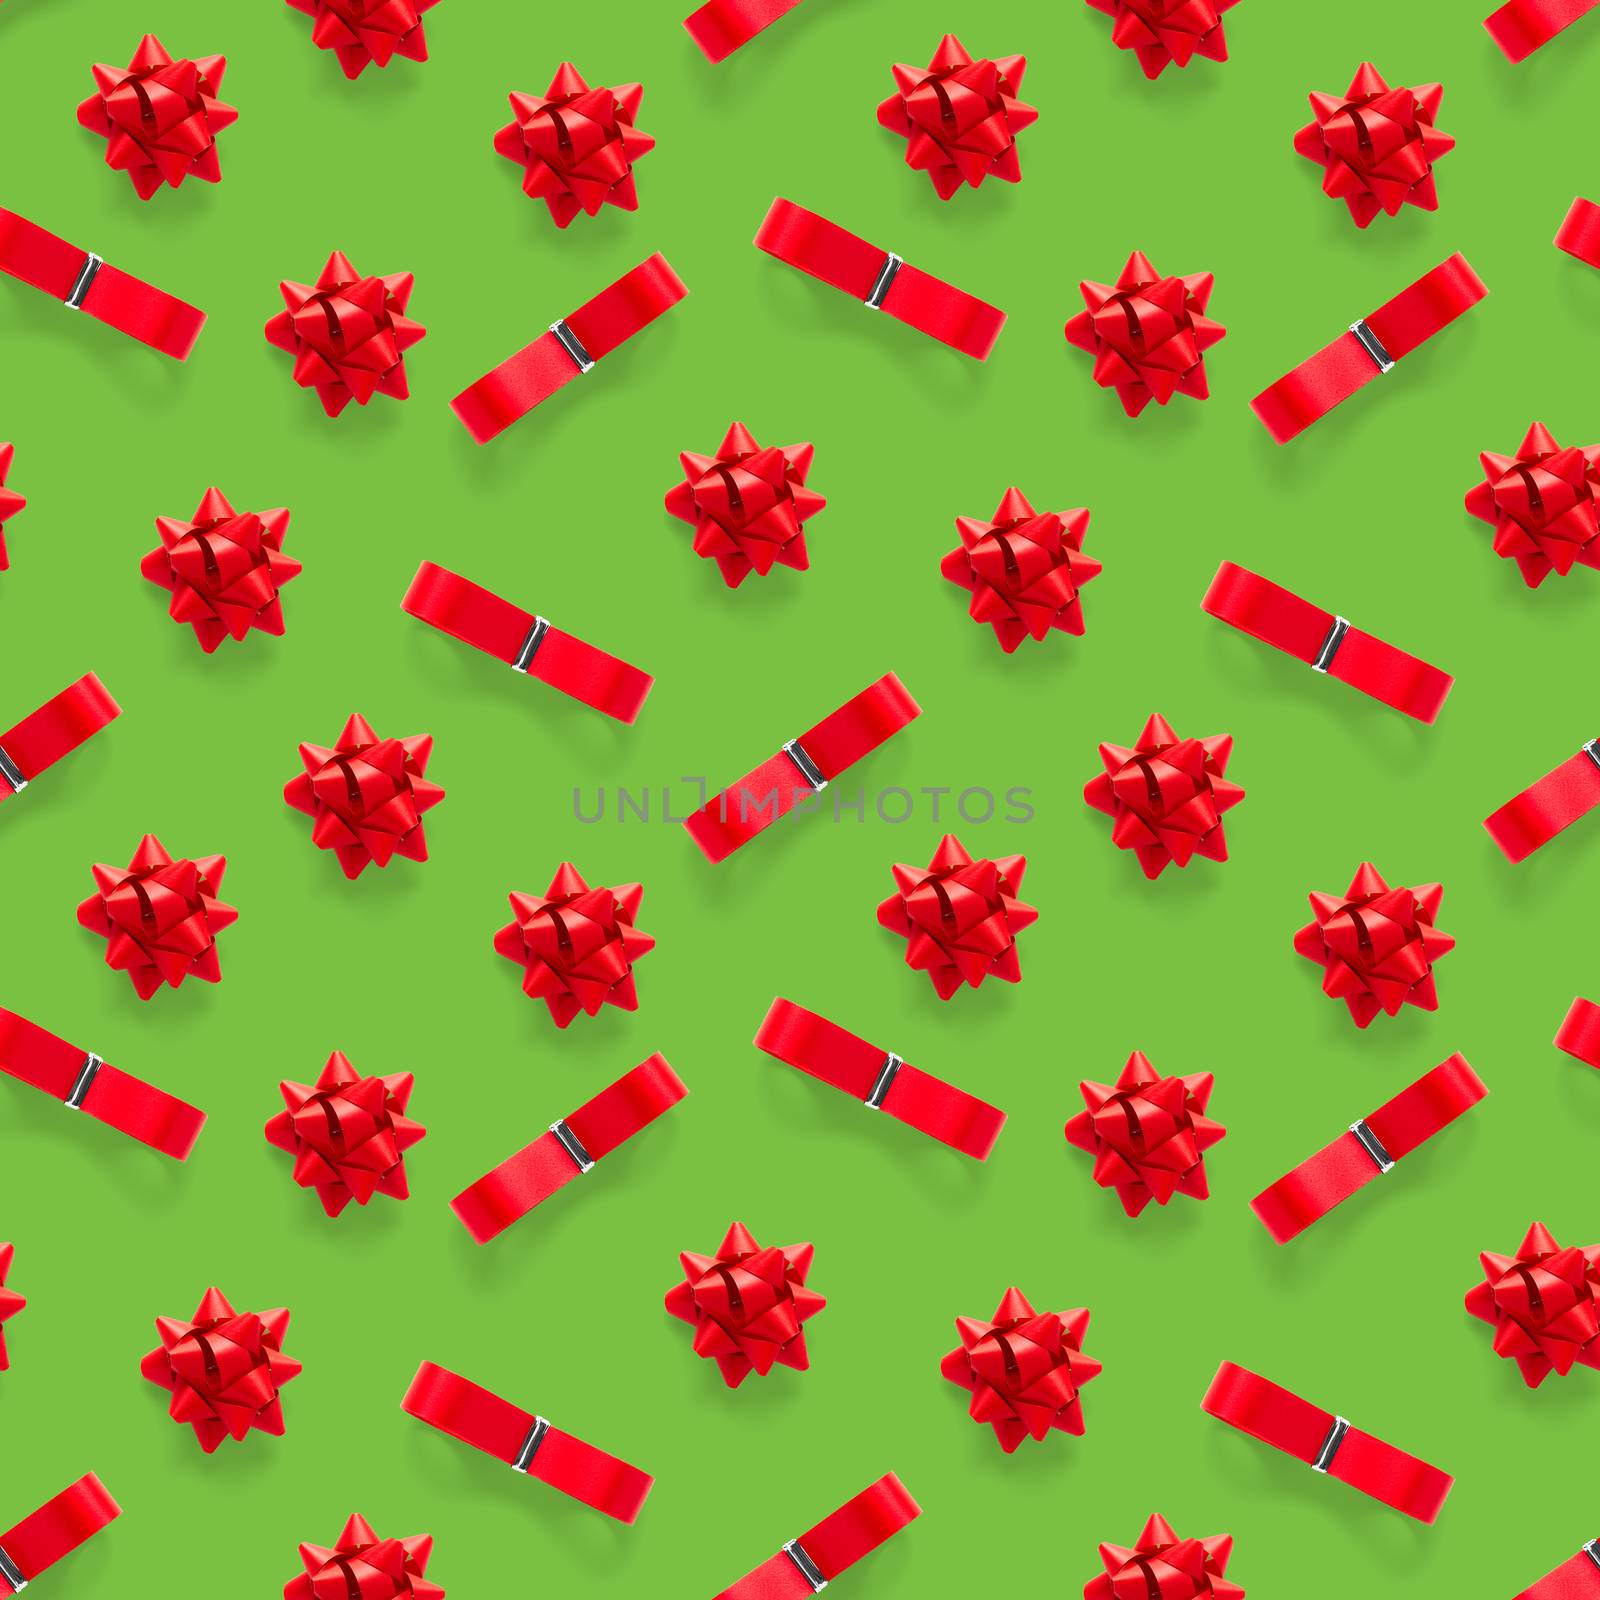 Seamless regular creative Christmas pattern with New Year decorations on green background. xmas Modern Seamless pattern made from christmas decorations. Photo quality pattern for fabric, prints, wallpapers, banners or creative design works.